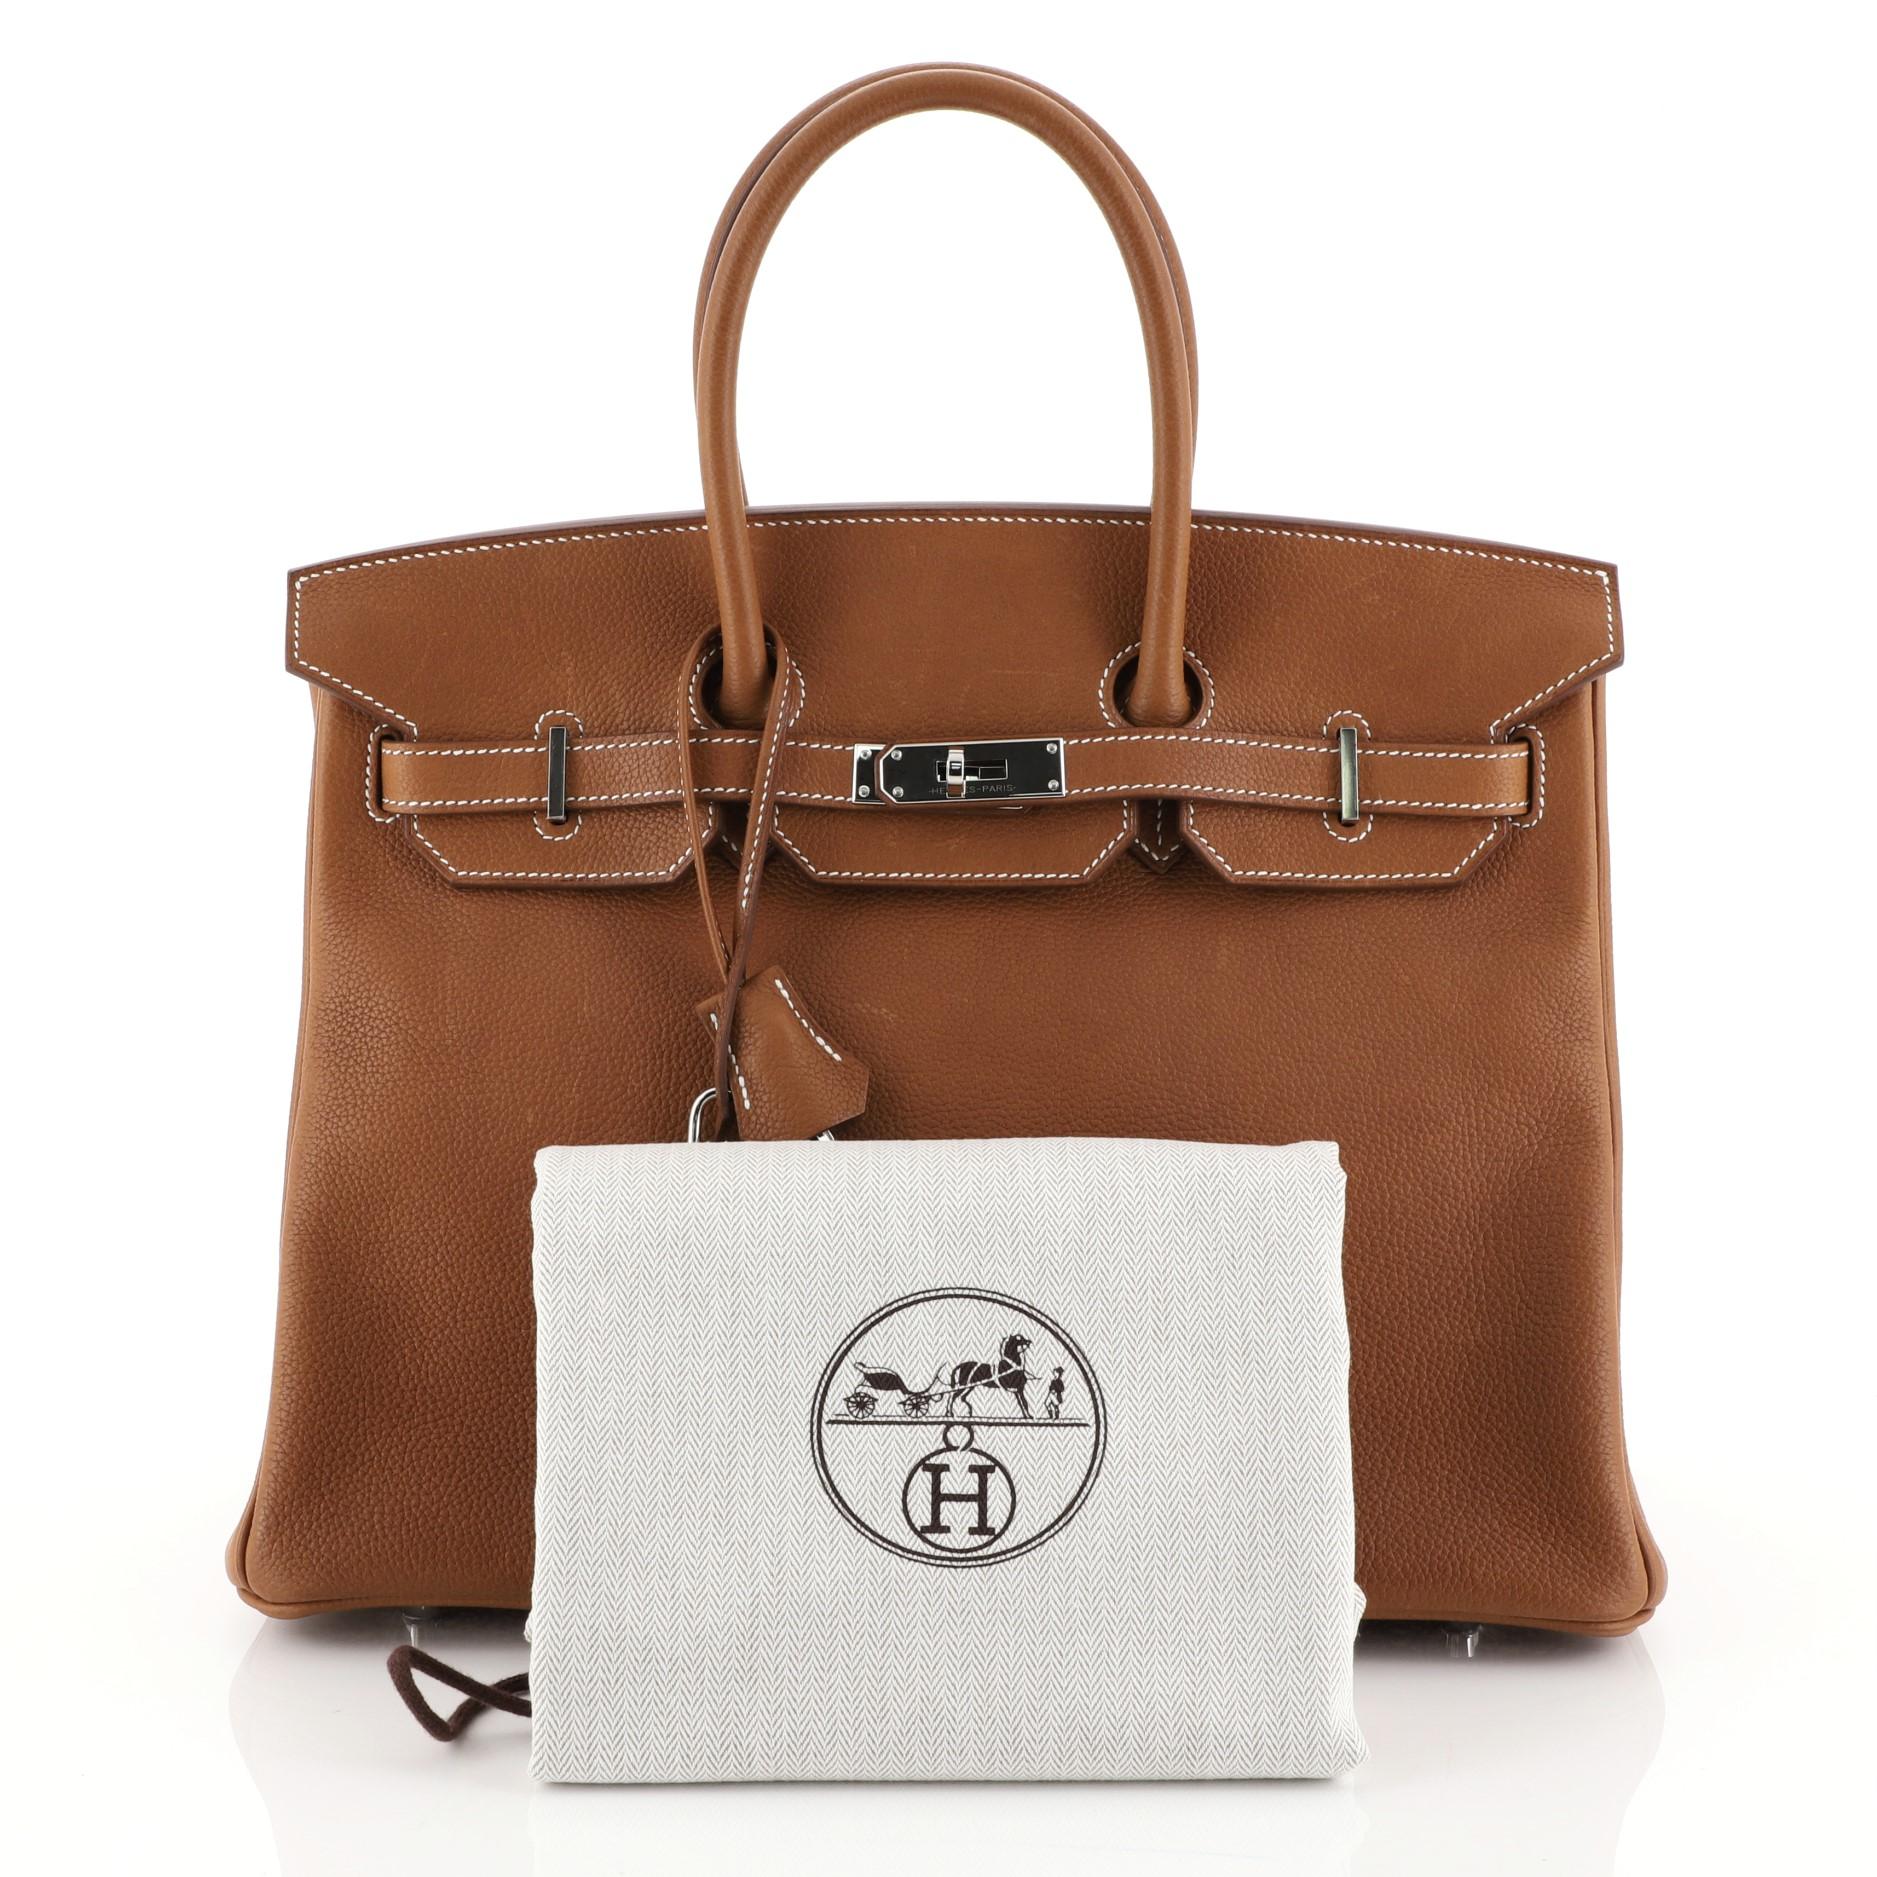 This Hermes Birkin Handbag Fauve Barenia Faubourg with Palladium Hardware 35, crafted from Fauve brown Barenia Faubourg leather, features dual-rolled top handles, frontal flap, and palladium hardware. Its turn-lock closure opens to a Fauve brown